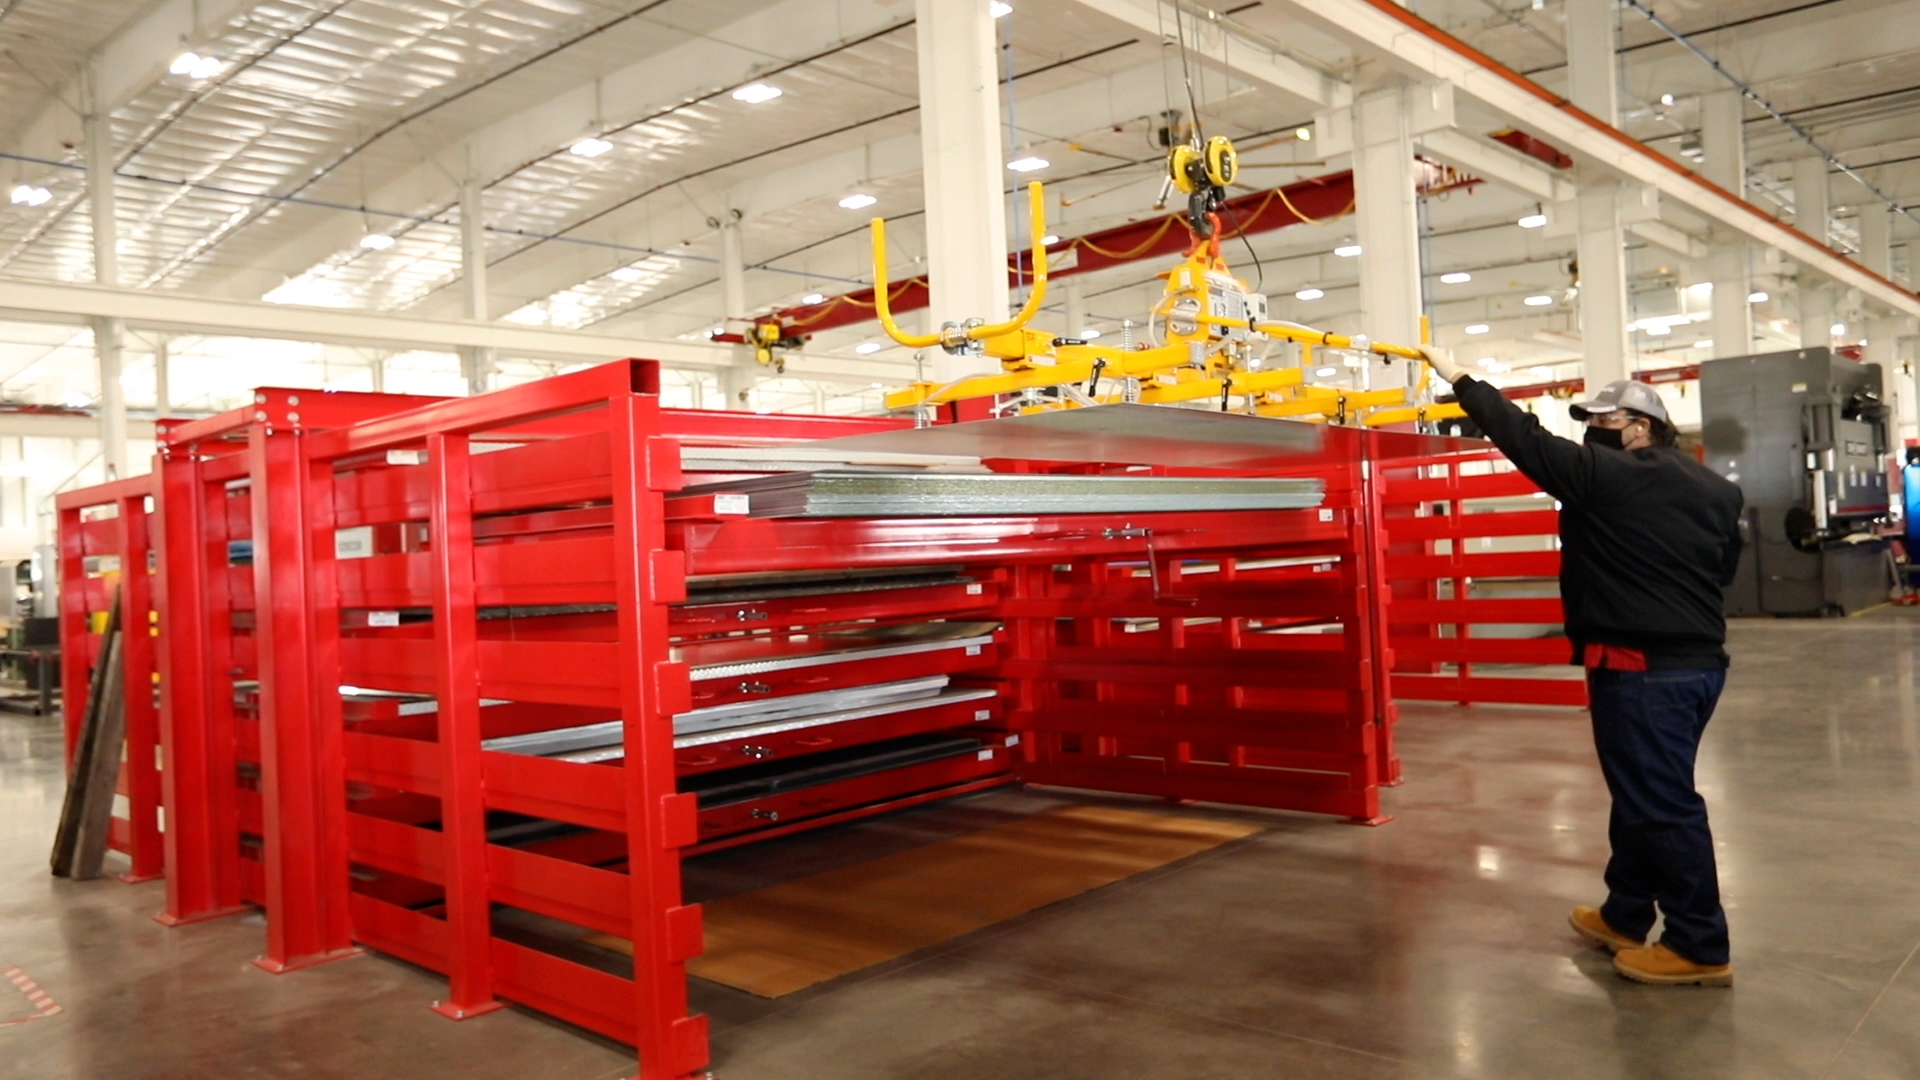 RollOut Sheet Metal Racks Roll Out Racks for Flat Metal Storage Steel Storage Systems